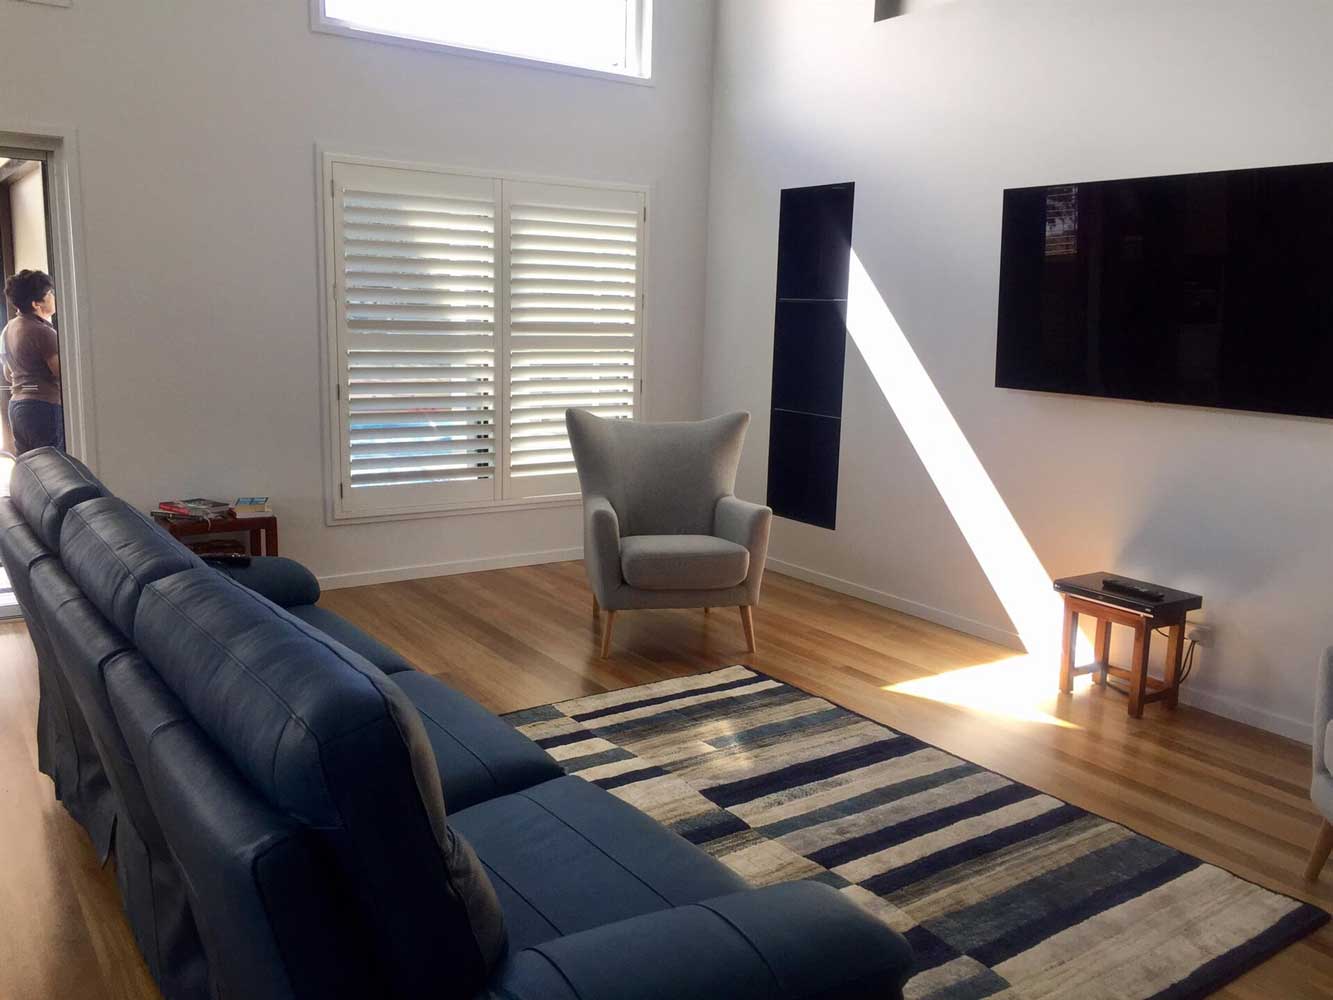 Living room With Shutters— Screens & Blinds in Thabeban, QLD